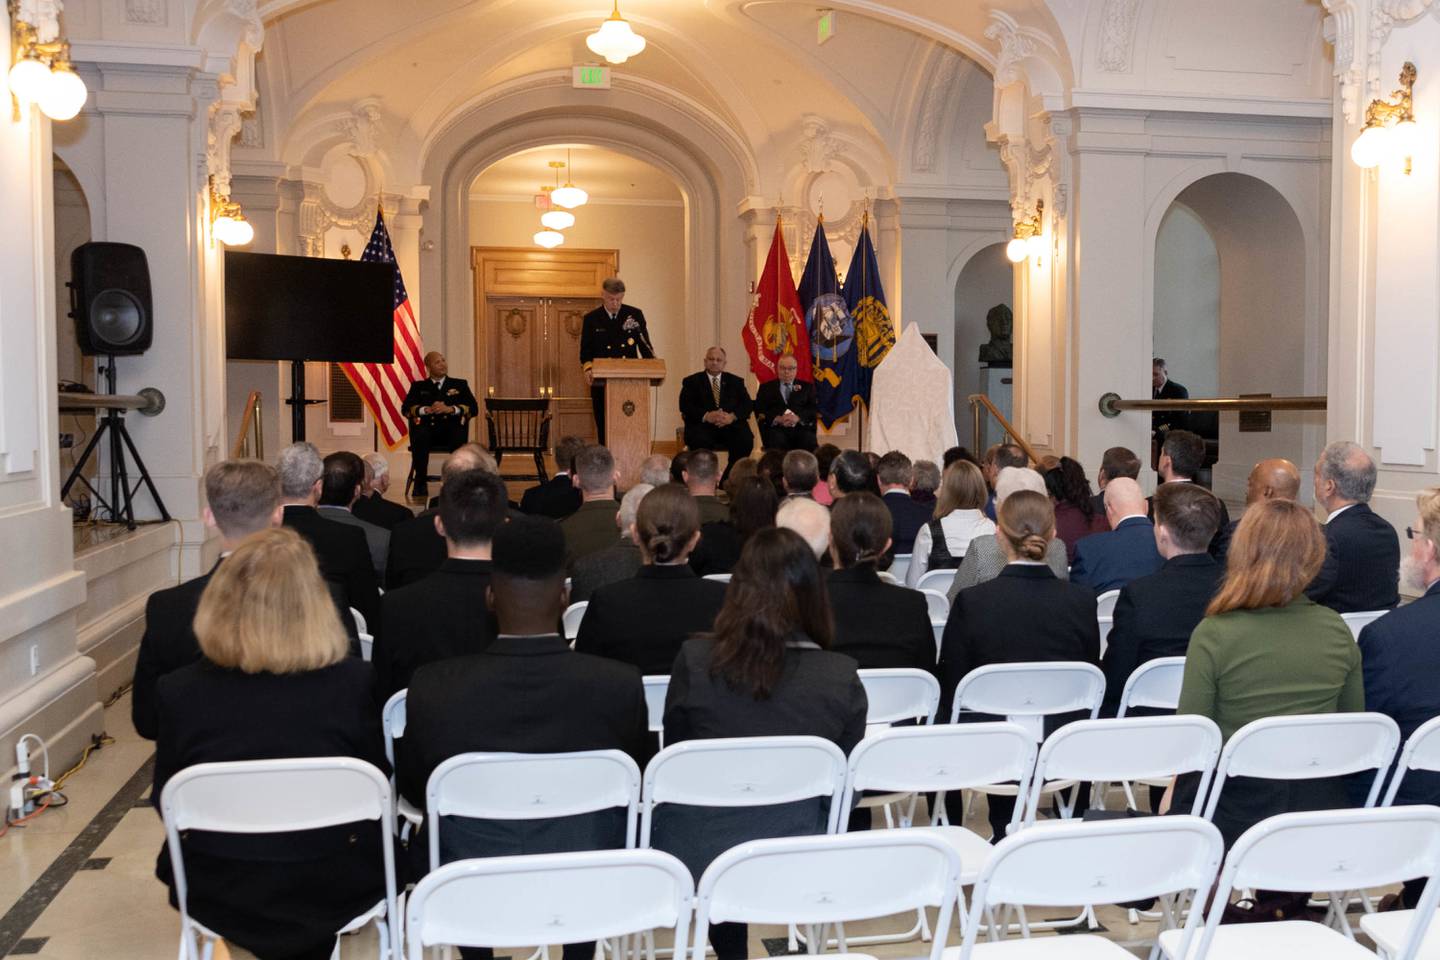 Superintendent Vice Adm. Sean Buck delivers remarks during a renaming ceremony held in Mahan Hall at the U.S. Naval Academy.